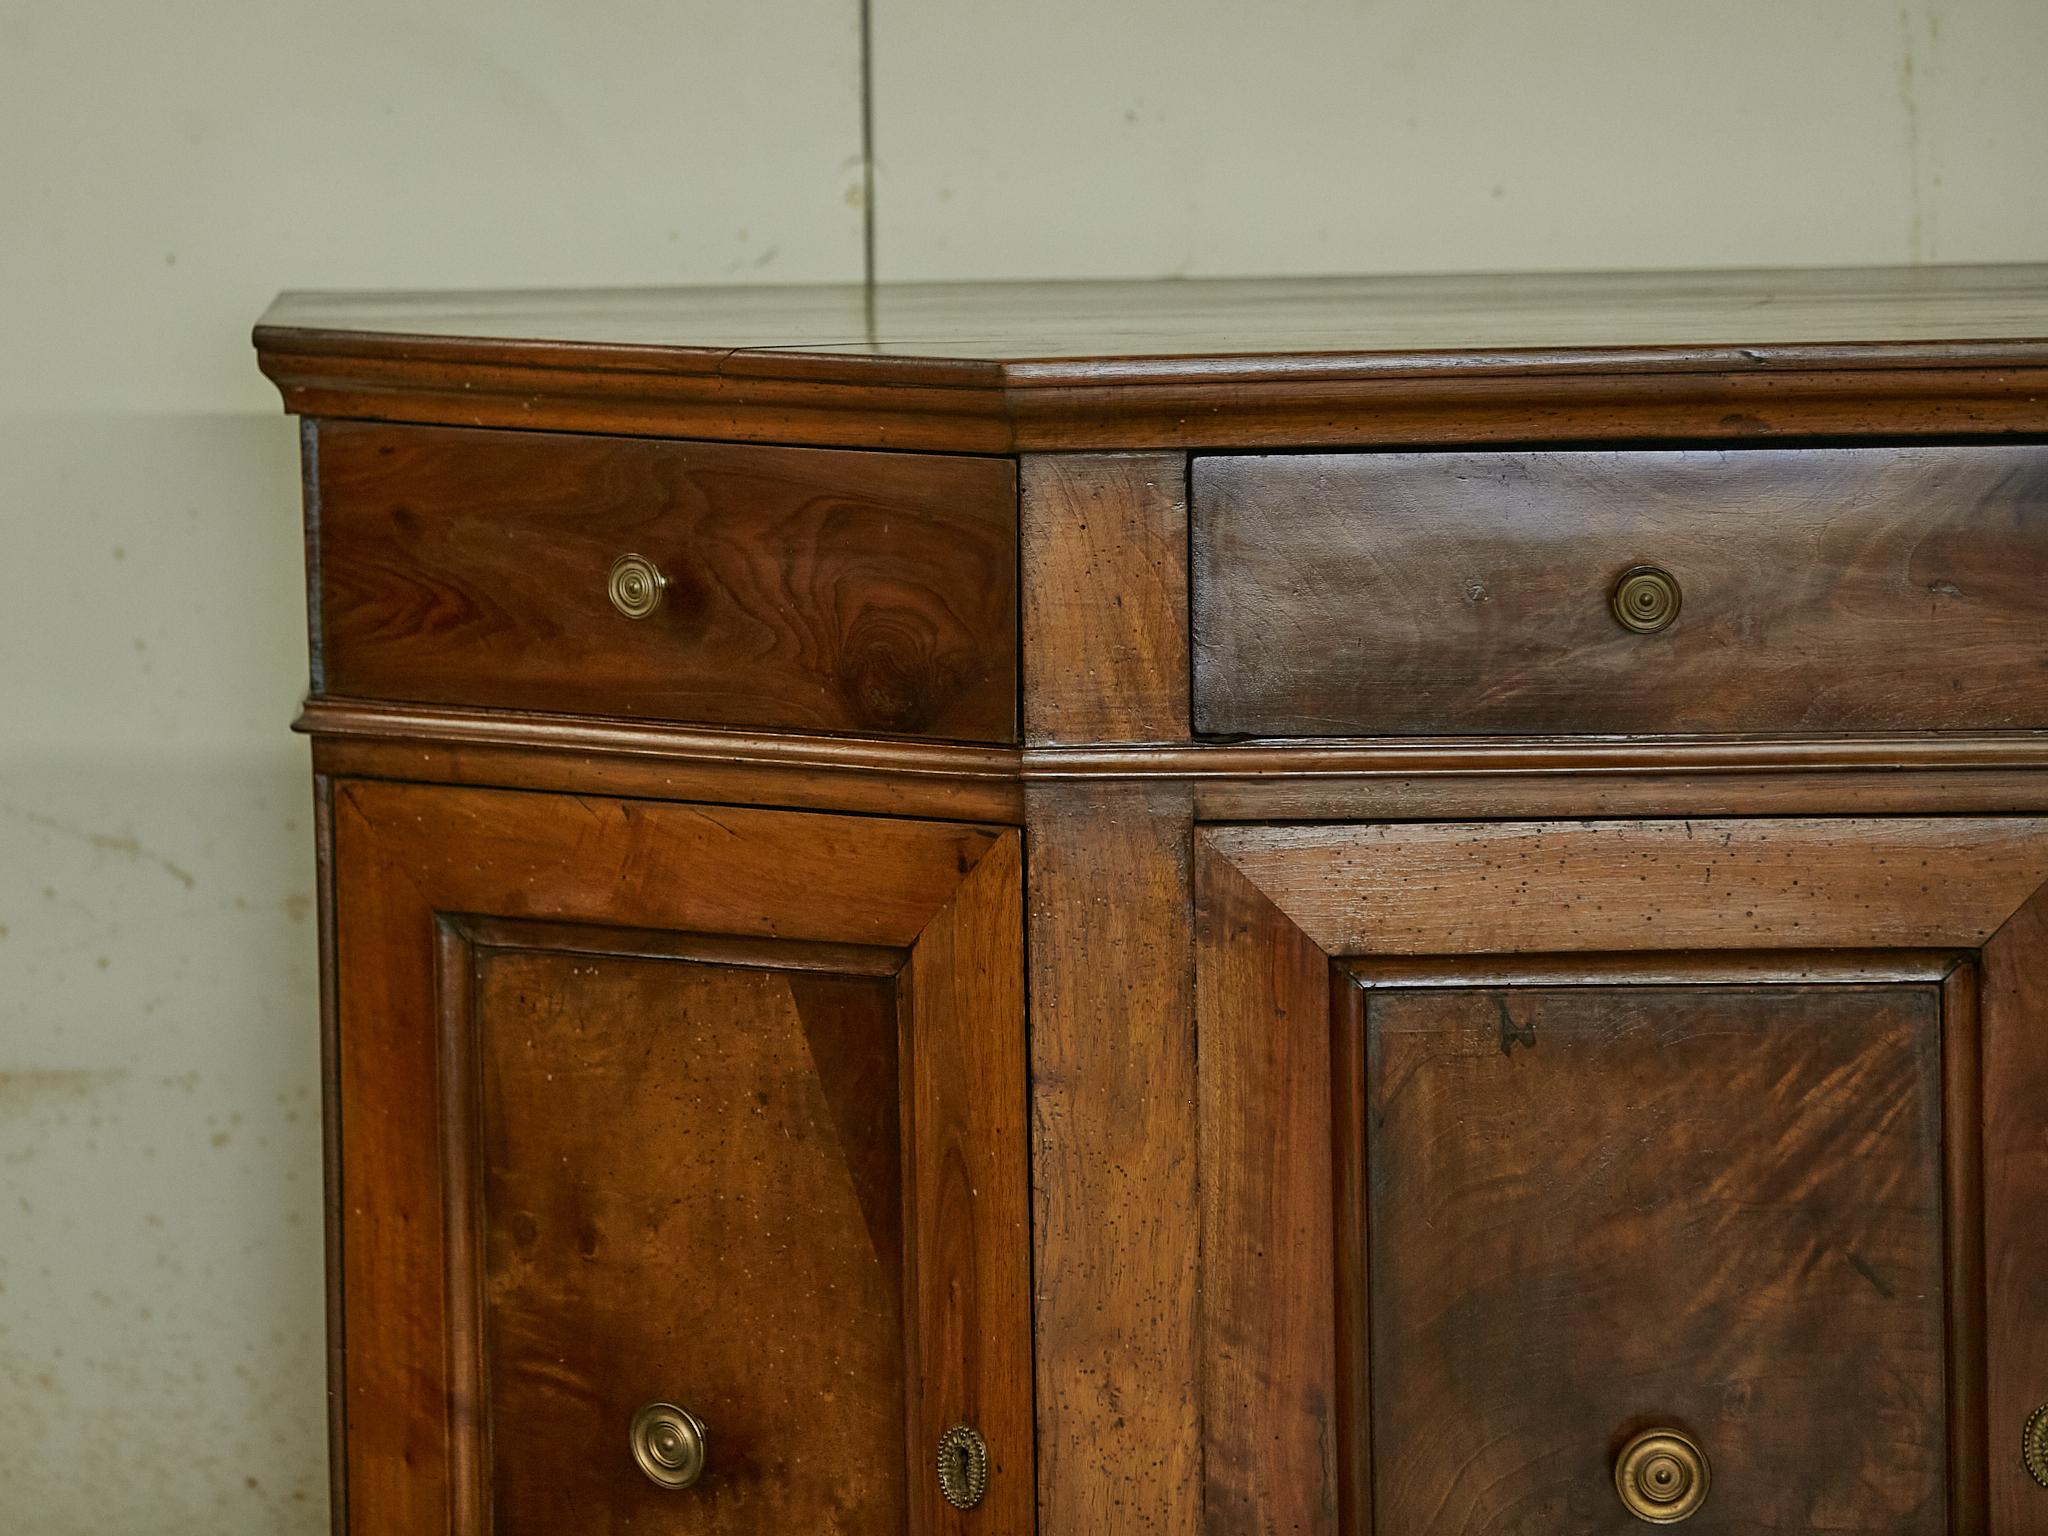 19th Century Italian 1820s Walnut Credenza with Canted Sides, Three Drawers and Four Doors